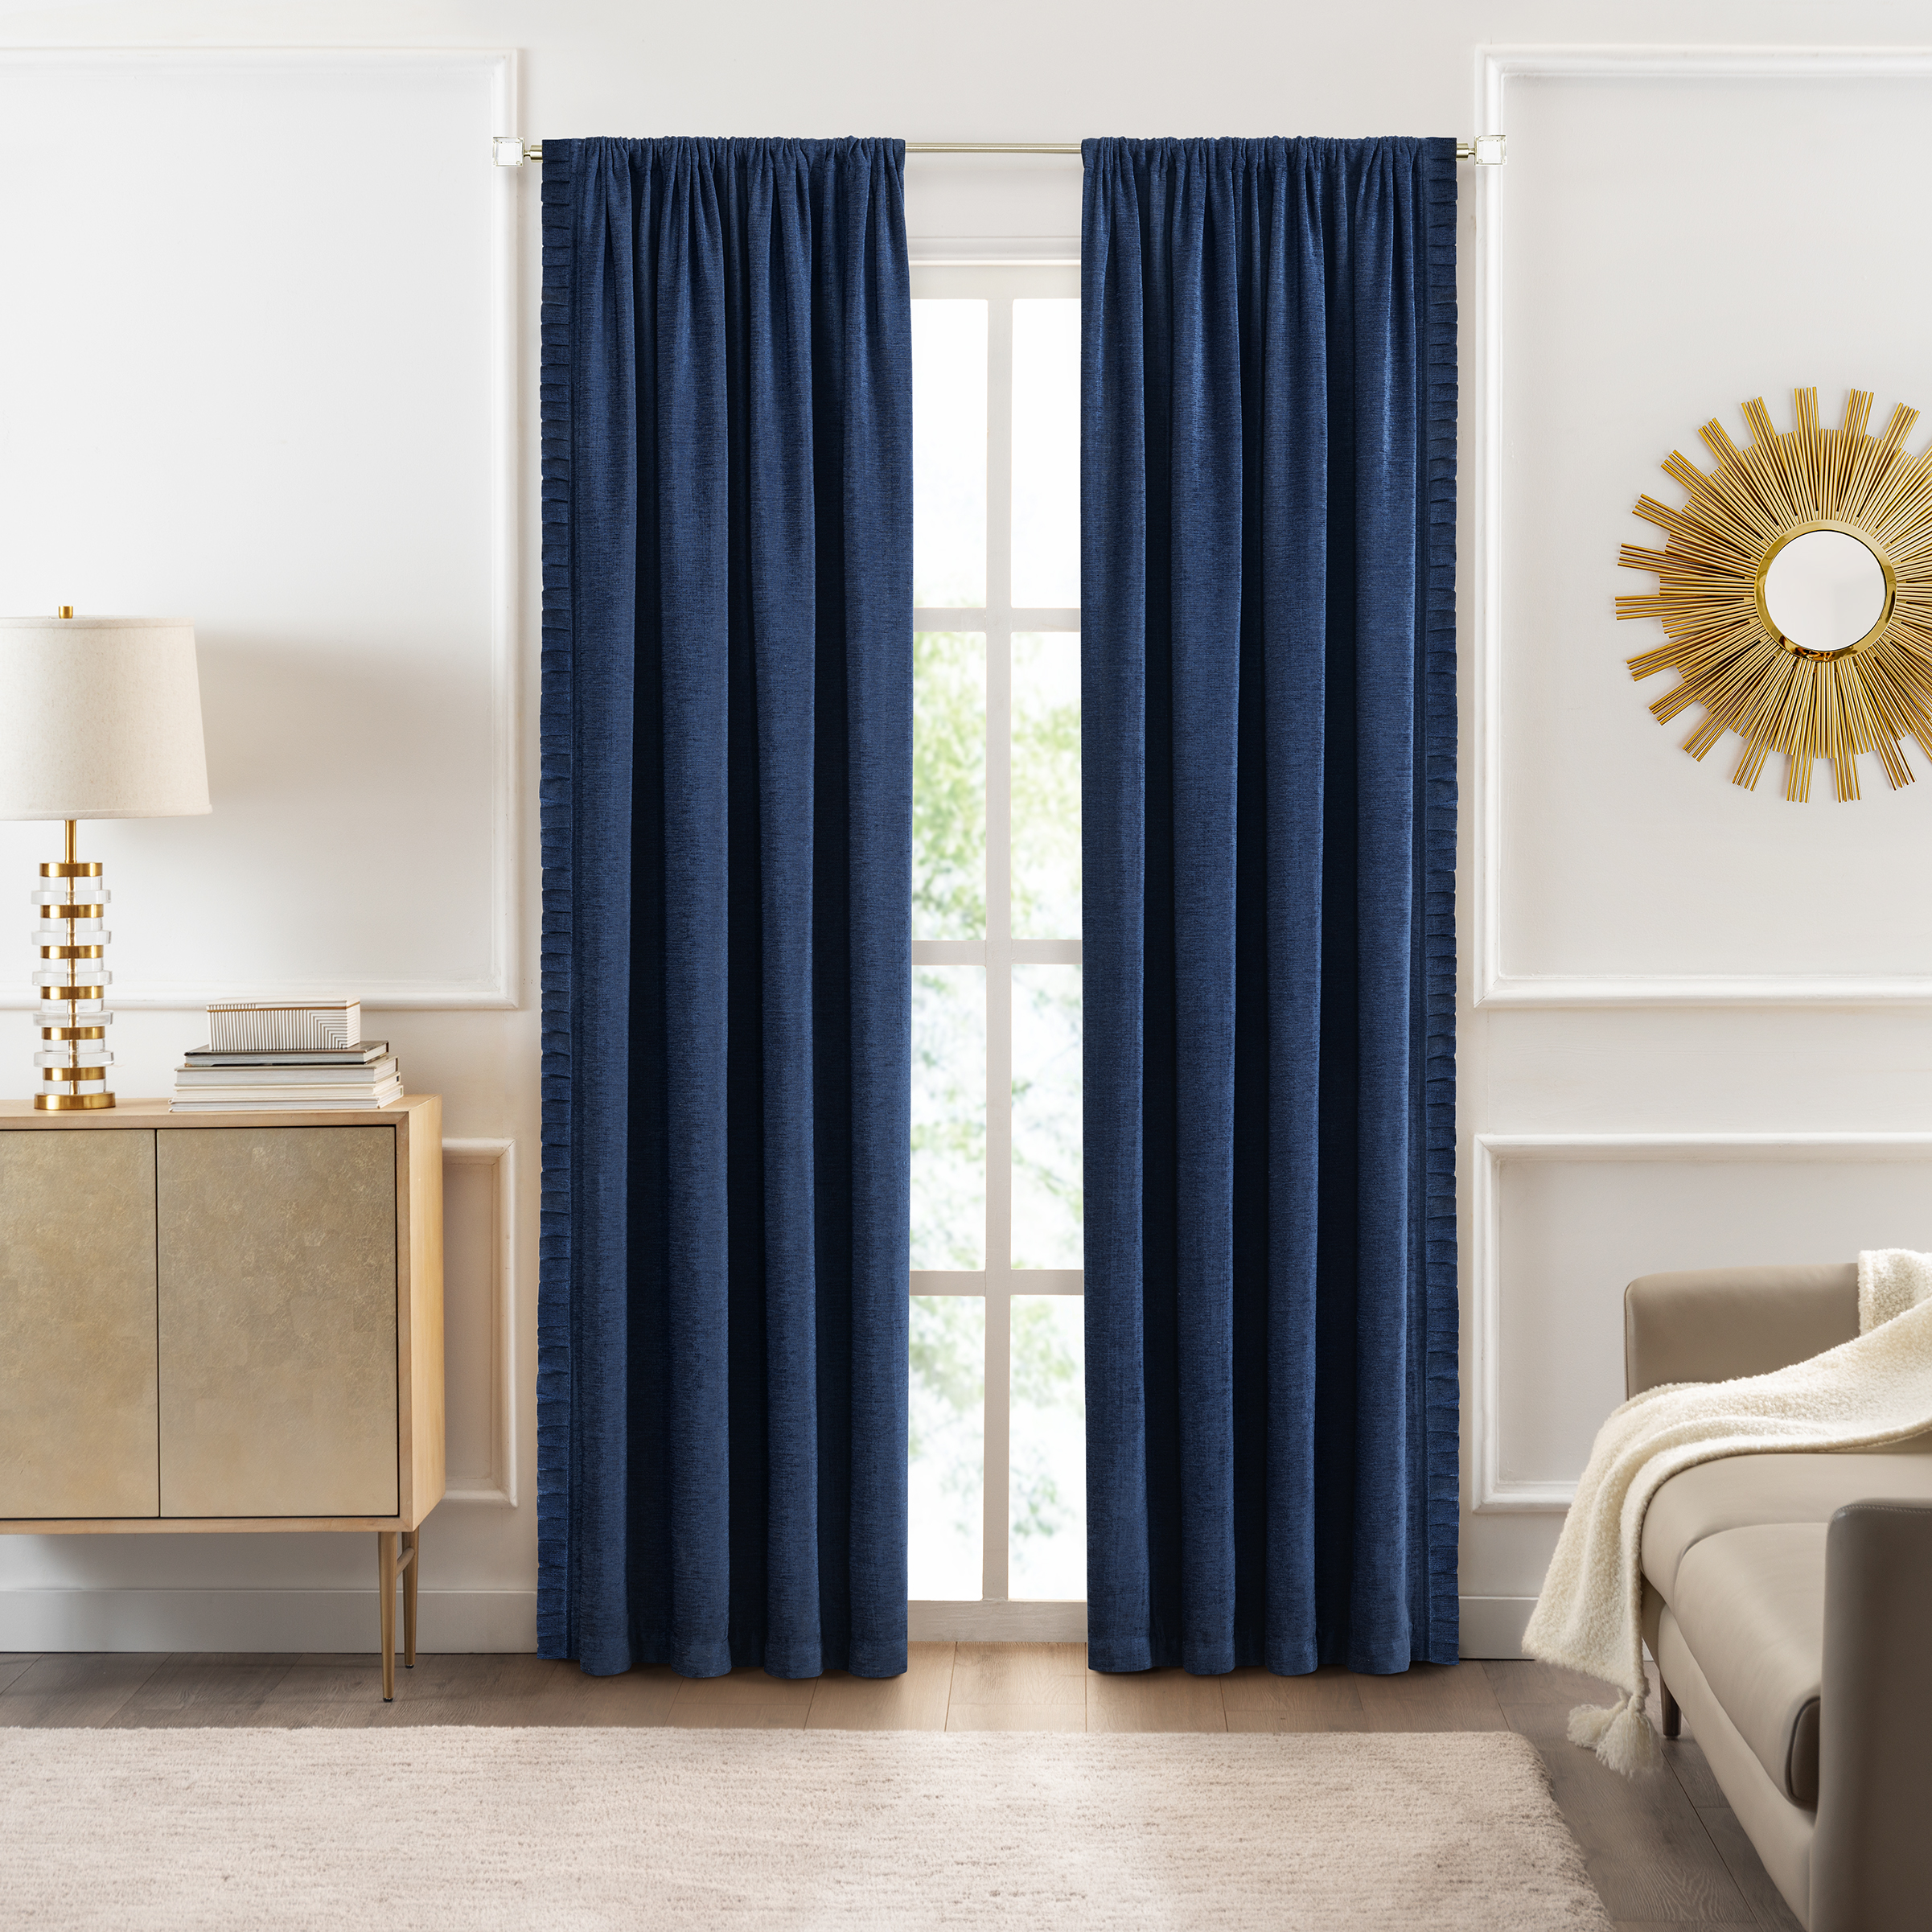 Achim Bordeaux Indoor Polyester Light Filtering Solid Curtain Panel, Navy, 52-in W x 63-in L - image 1 of 7